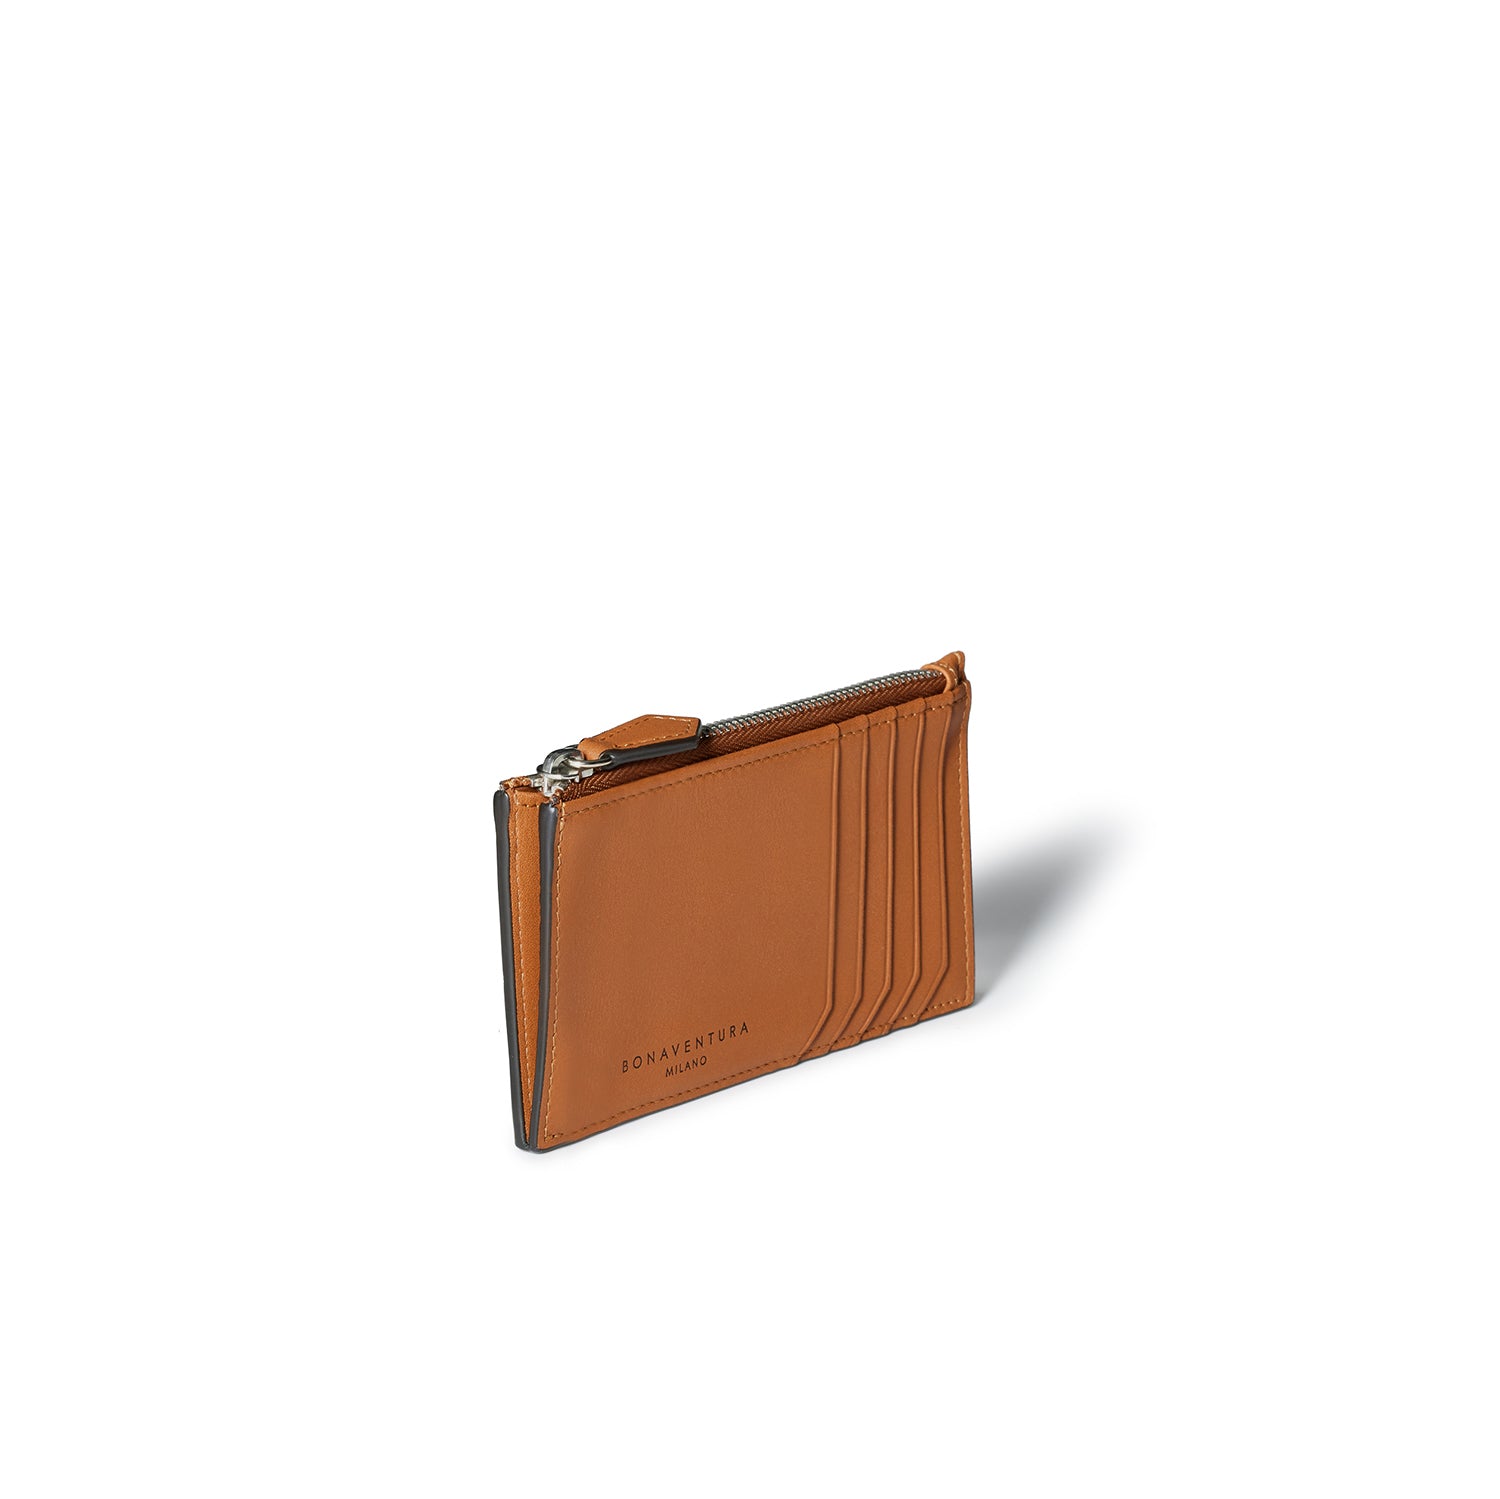 Mini zip wallet in smooth leather